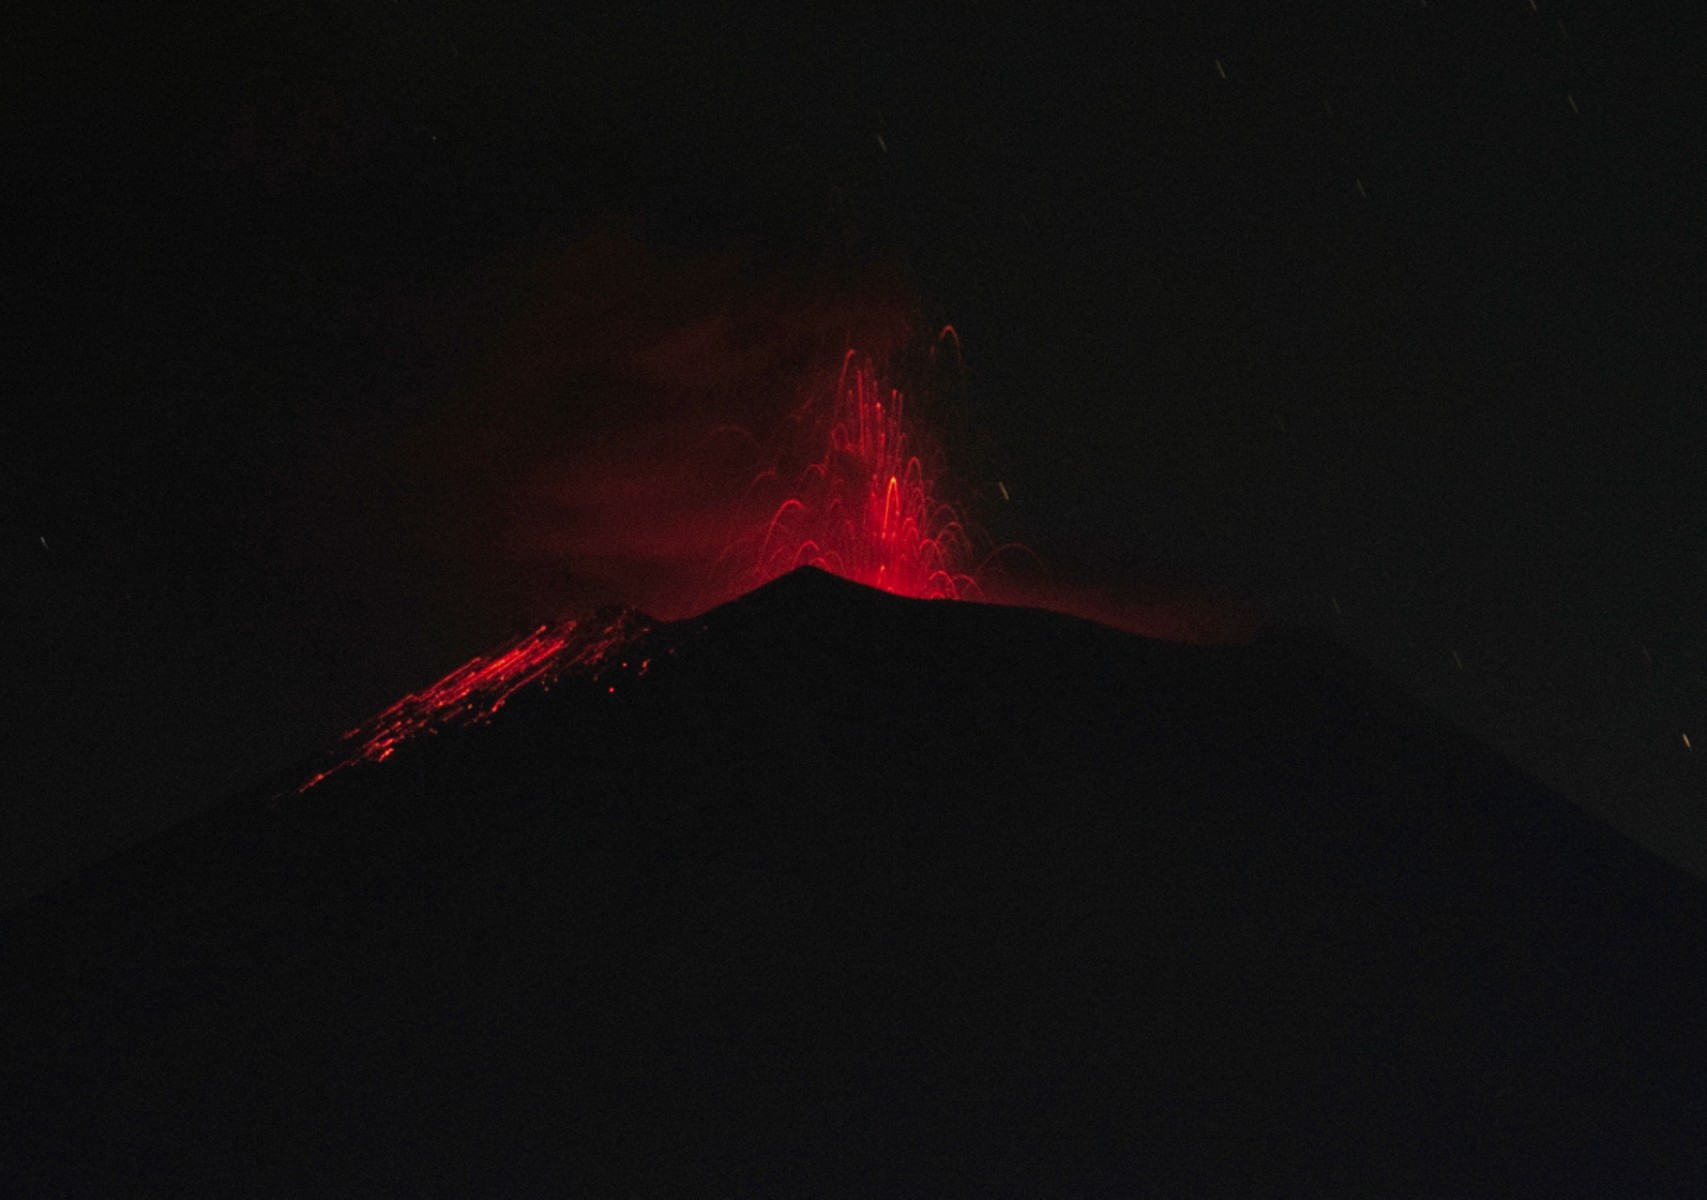 Incandescent materials, ash and smoke are spewed from the Popocatepetl volcano as seen from the Santiago Xalitzintla community, state of Puebla, Mexico, on May 25, 2023. - The Popocatepetl volcano, located around 70 kilometres (about 45 miles) from Mexico City, spewed more gas and ash into the sky on May 23 as authorities maintained their warning level at one step below red alert. The government is monitoring Popocatepetl "day and night," President Andres Manuel Lopez Obrador said after the volcano put on another fiery show overnight. 